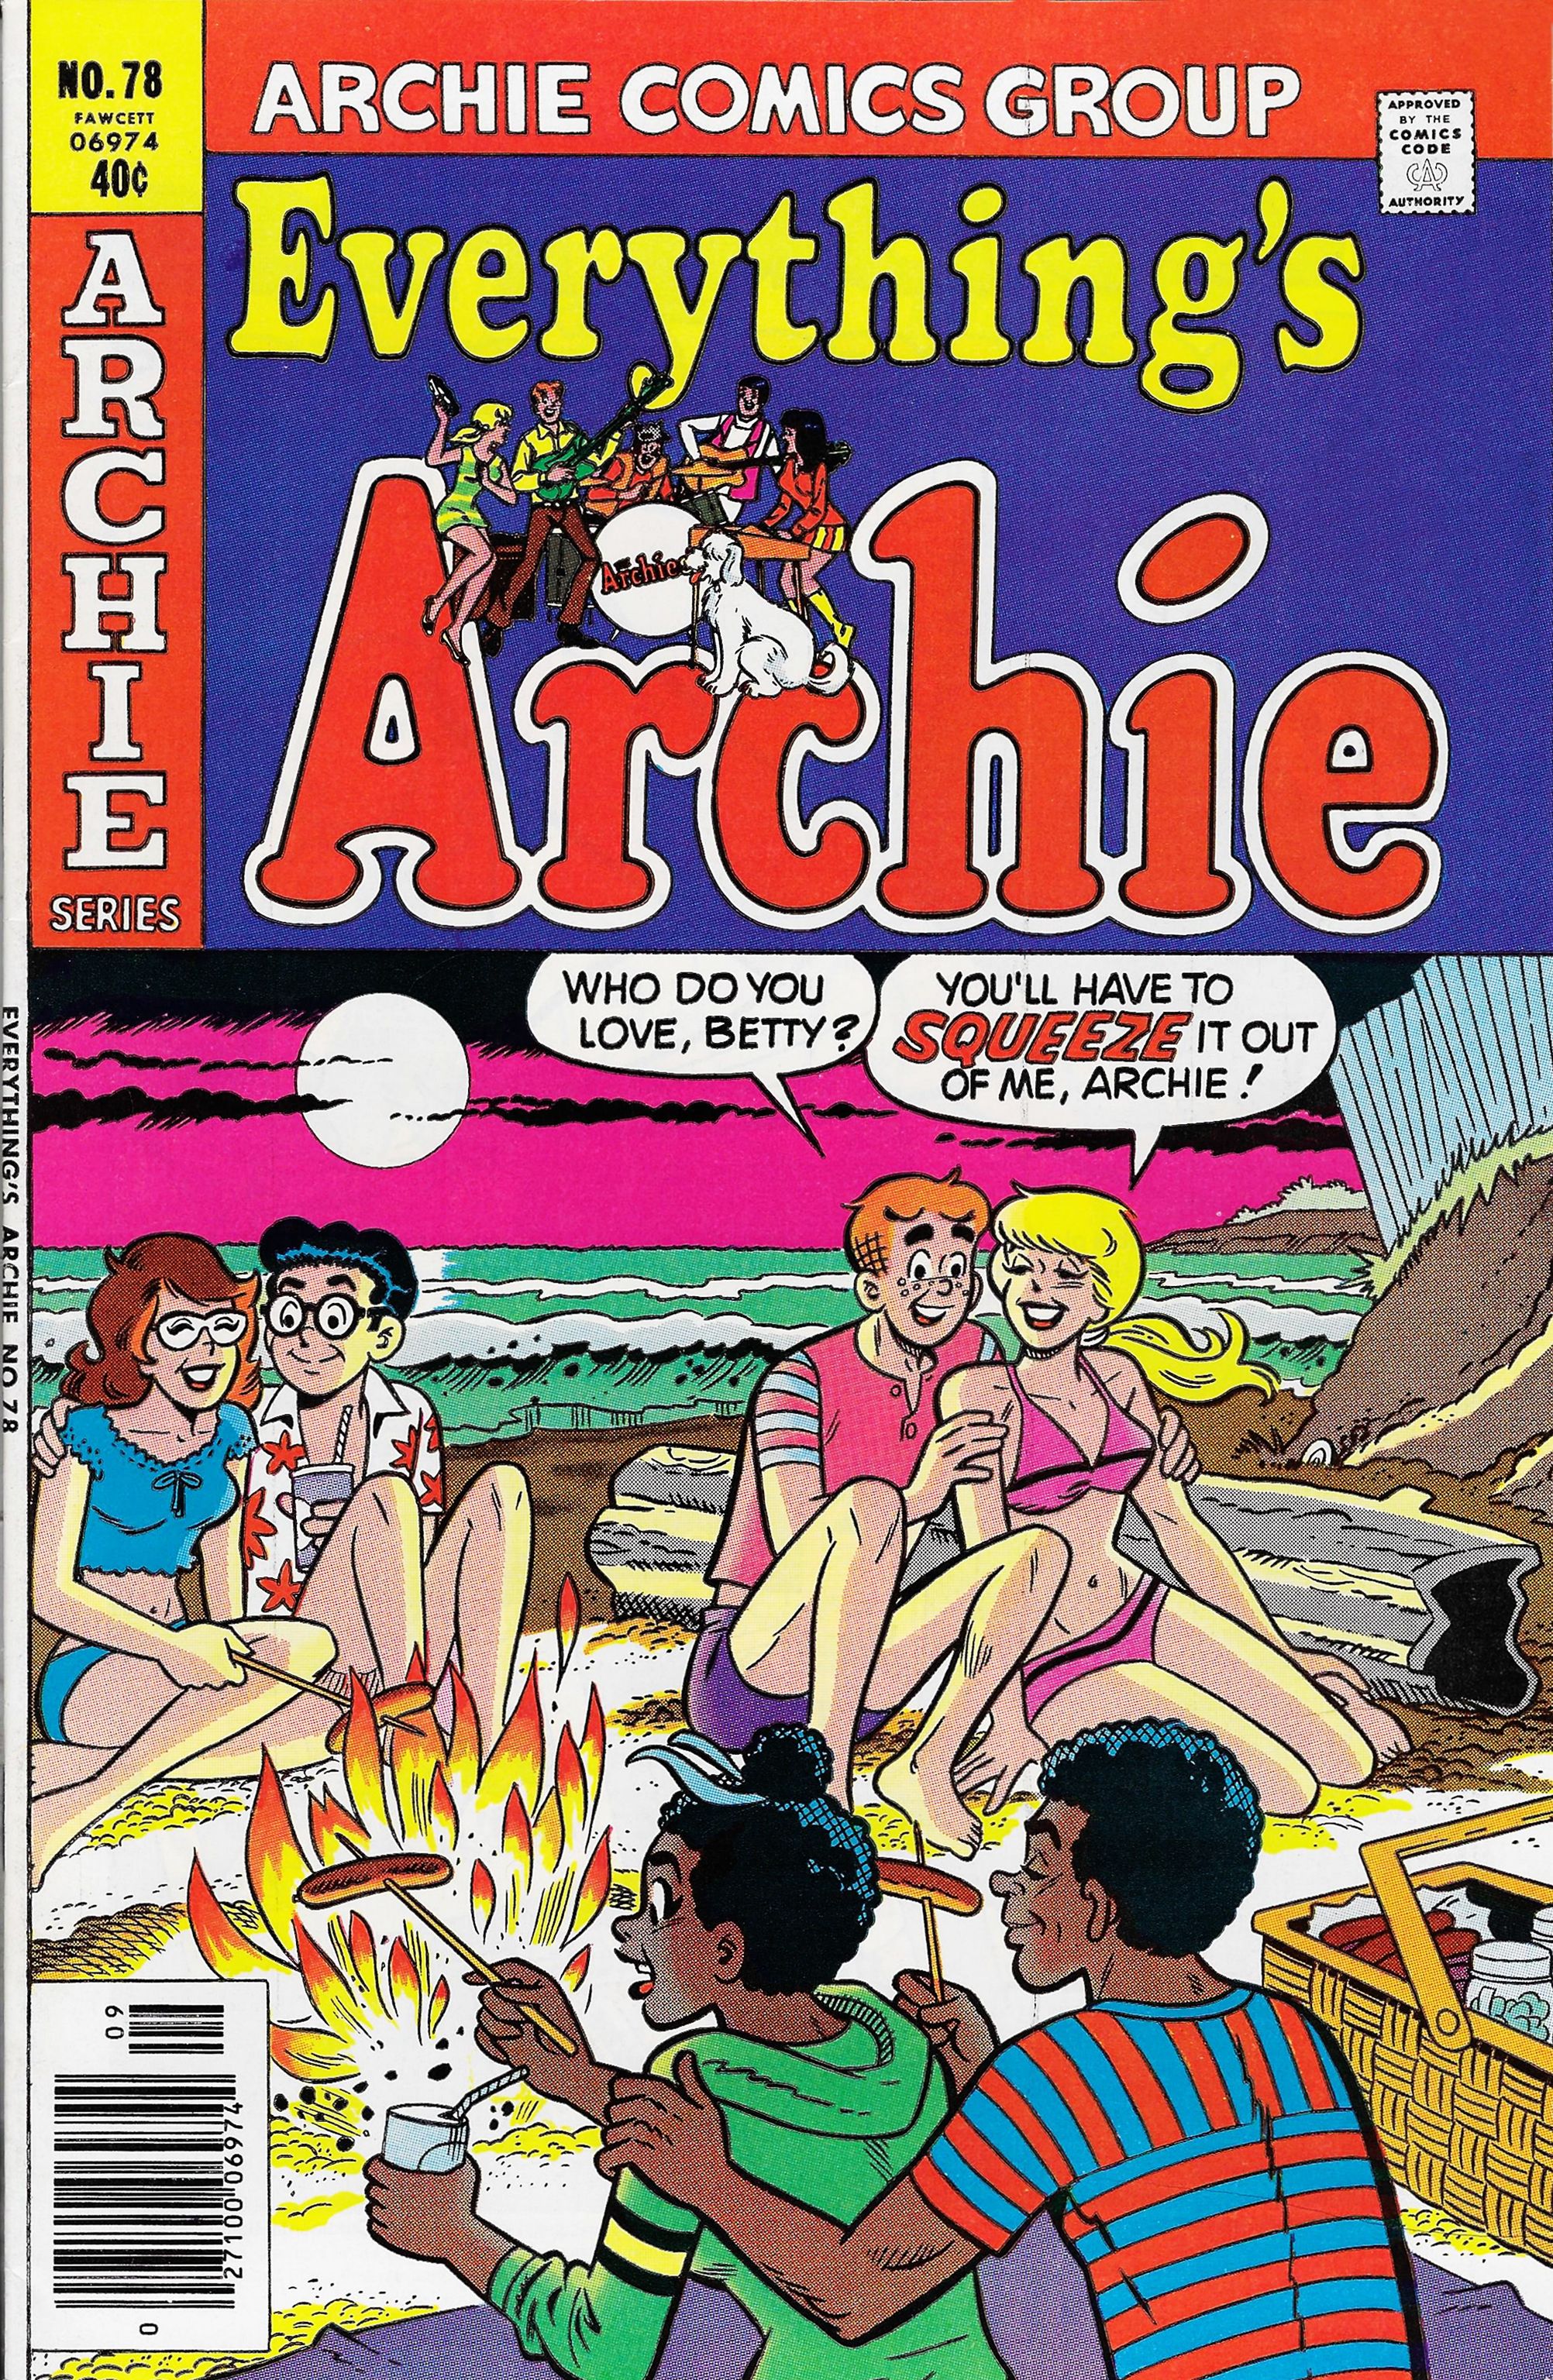 Read online Everything's Archie comic -  Issue #78 - 1